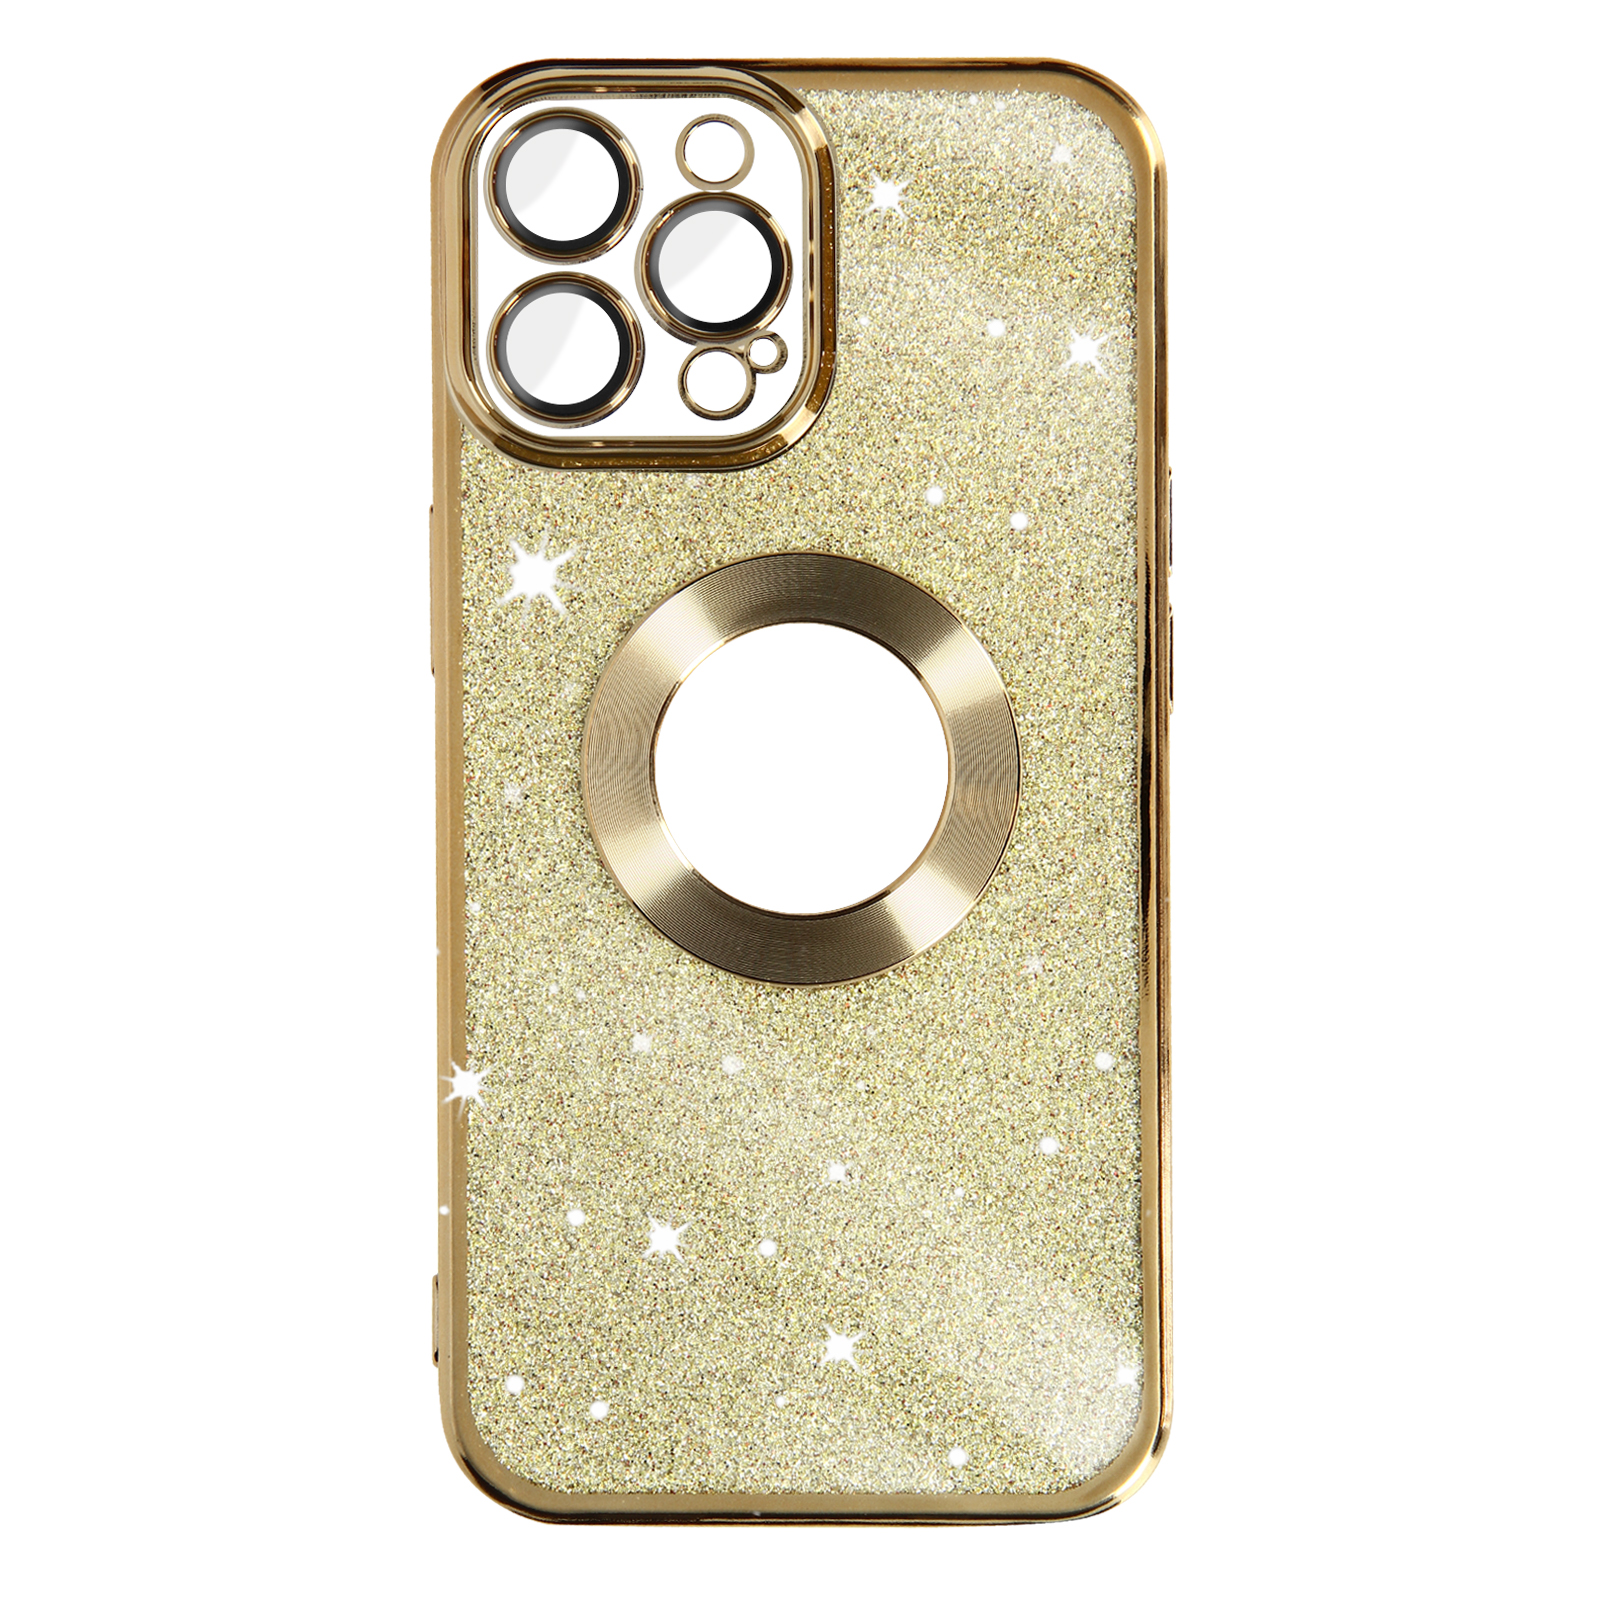 12 Pro Backcover, AVIZAR Gold Series, iPhone Spark Max, Protecam Apple,